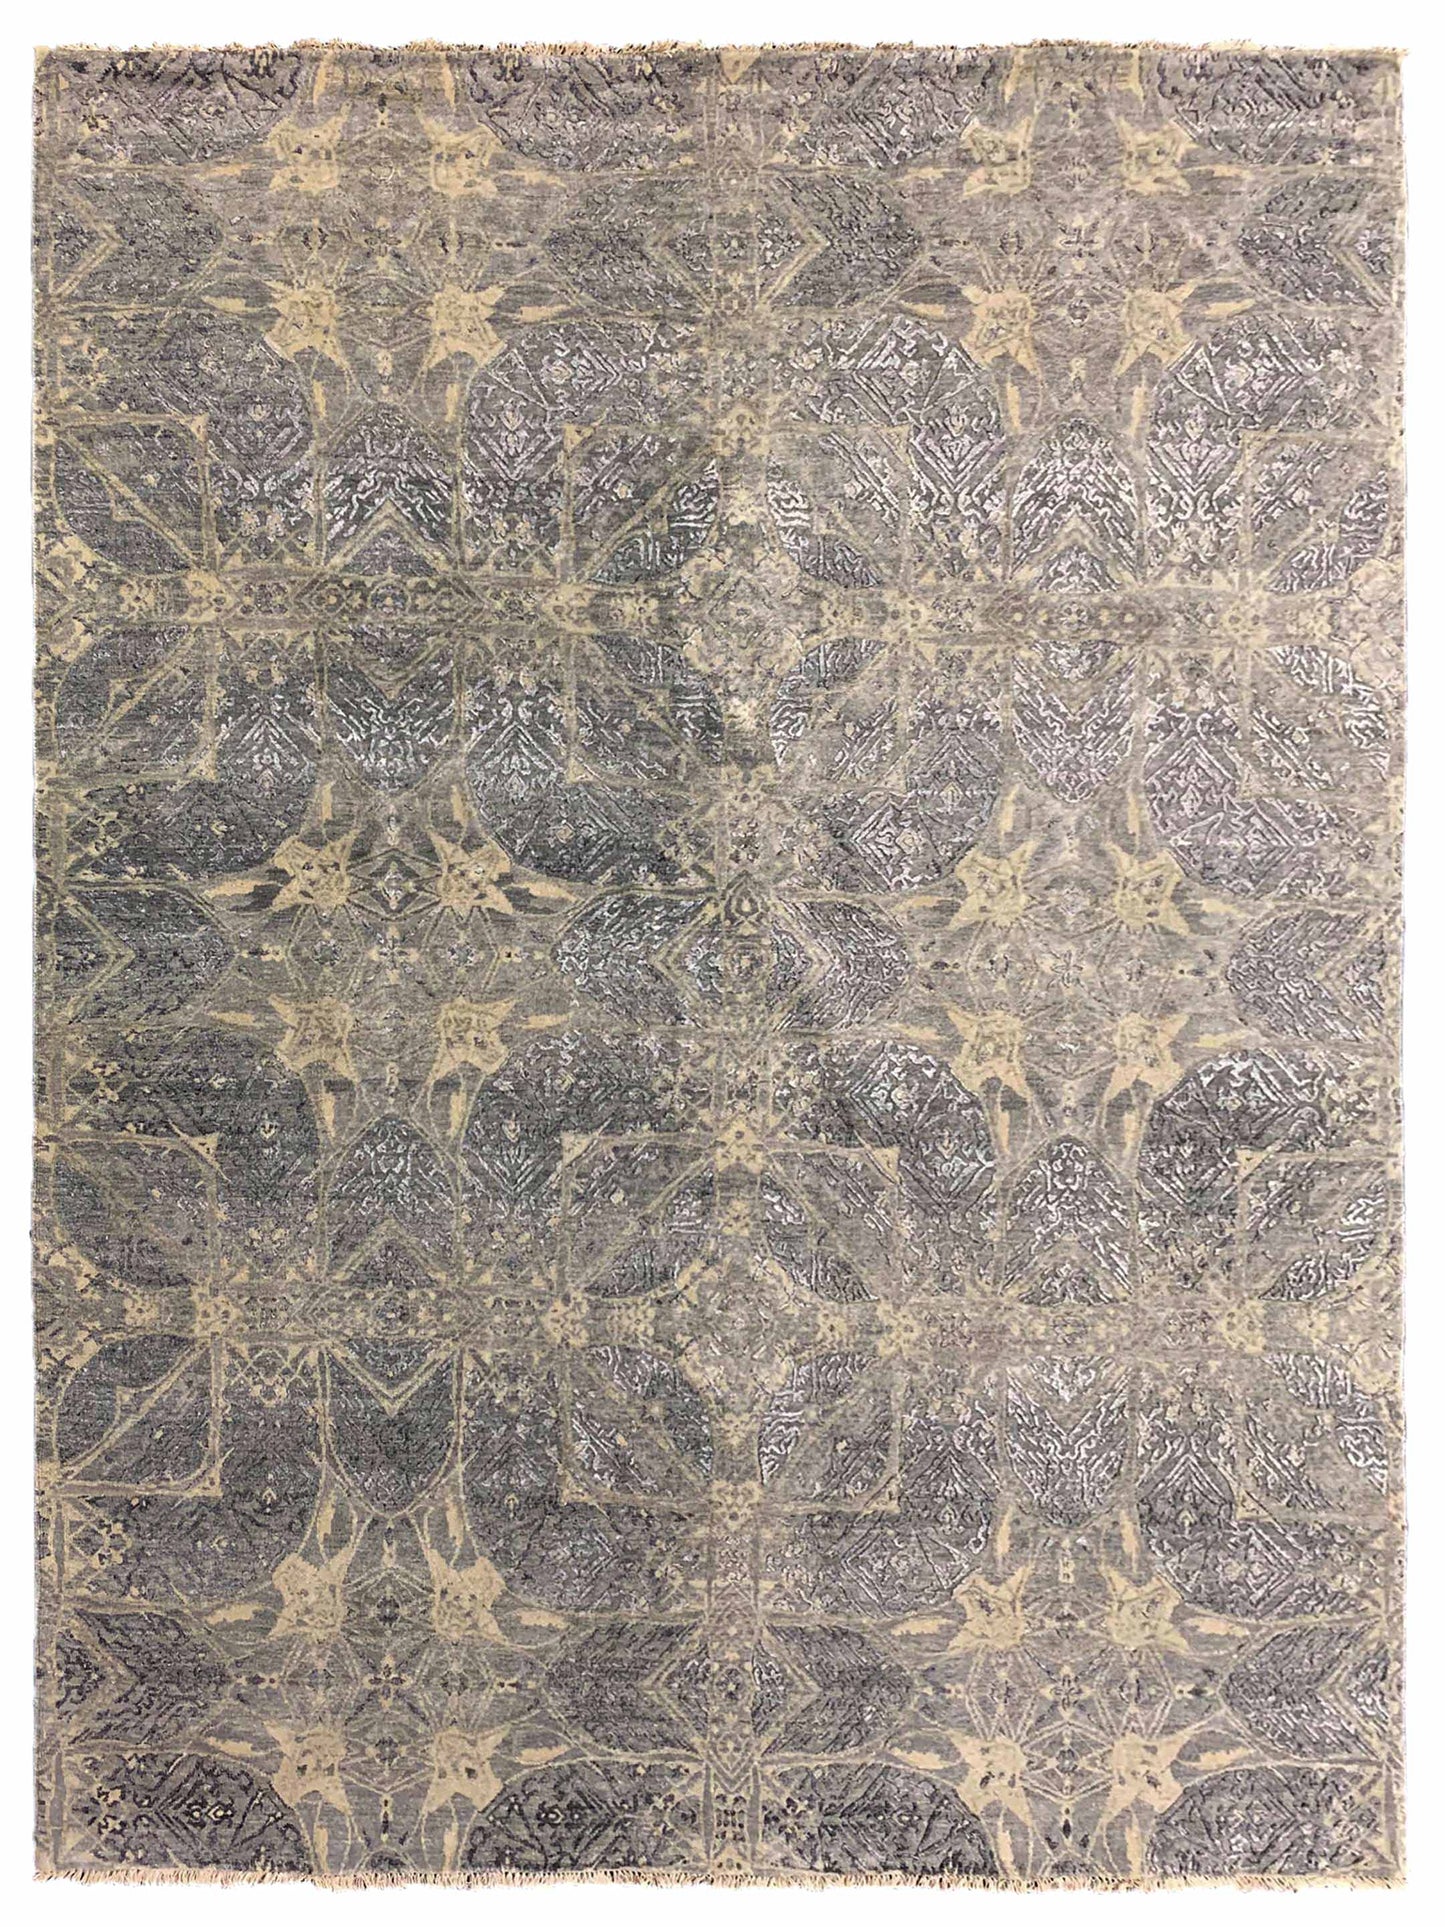 Artisan Adele DL-301 Midnight Transitional Knotted Rug